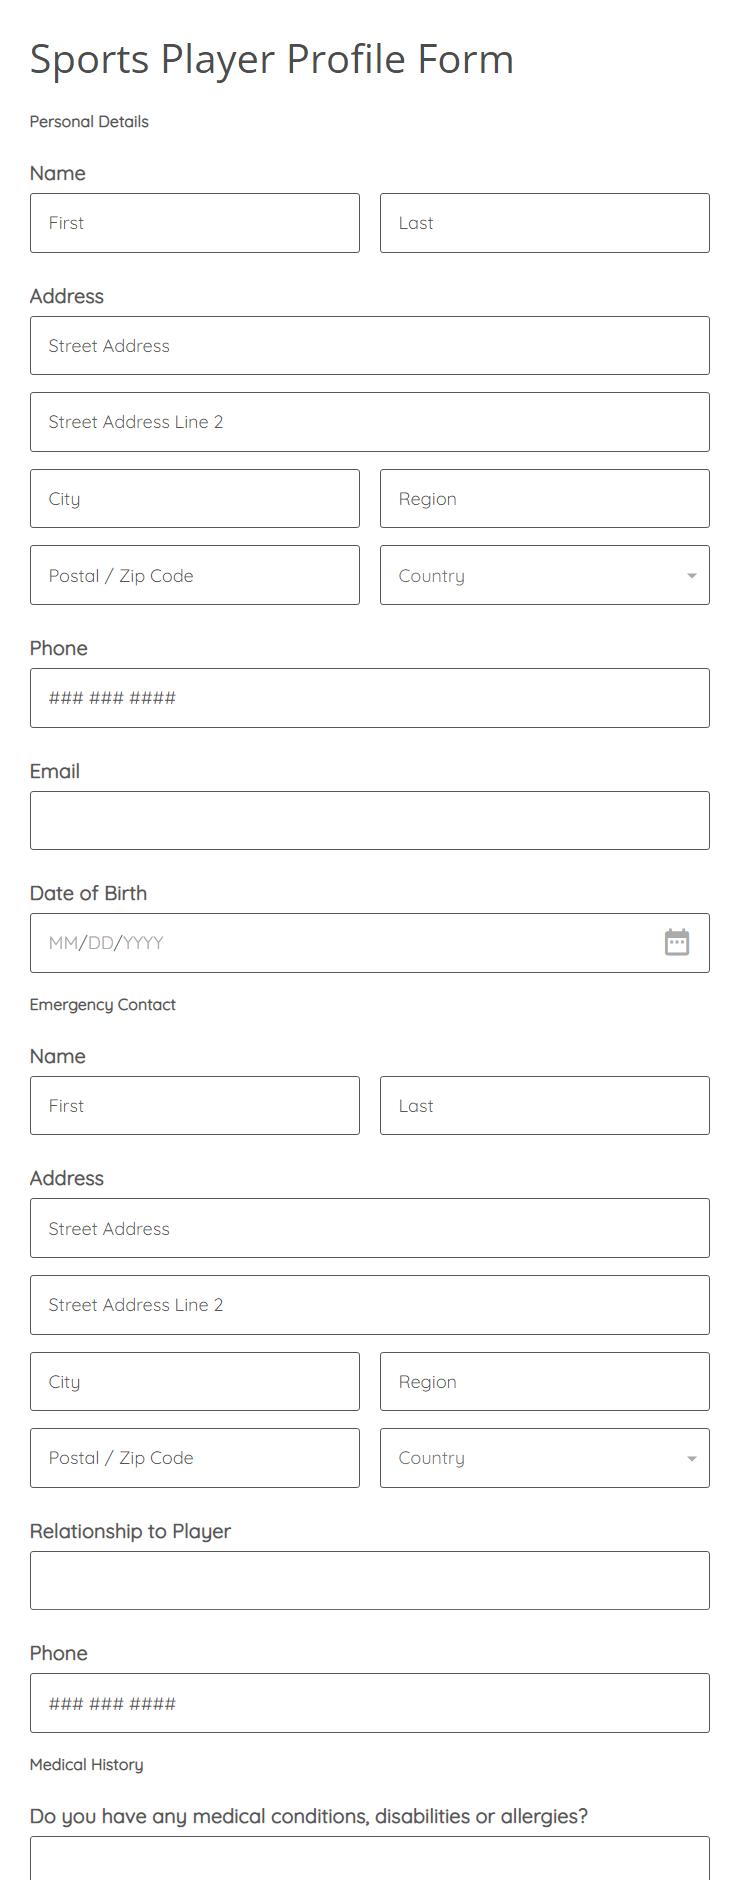 Sports Player Profile Form Template 123FormBuilder